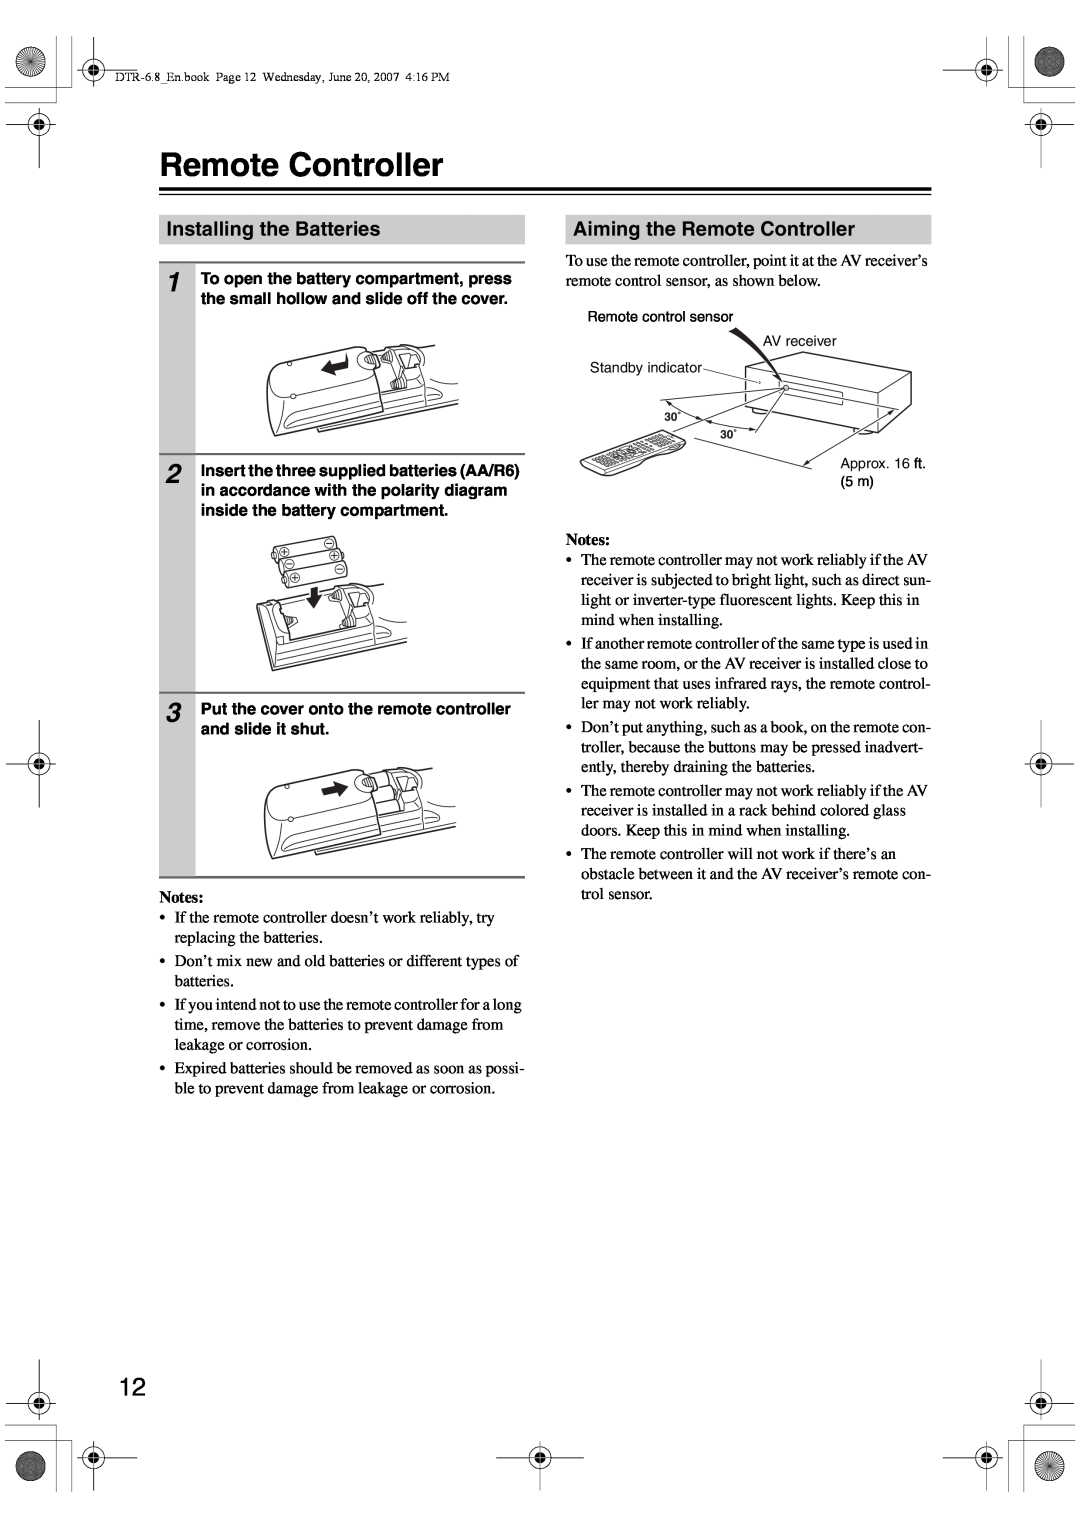 Integra DTR-6.8 instruction manual Installing the Batteries, Aiming the Remote Controller, Notes 